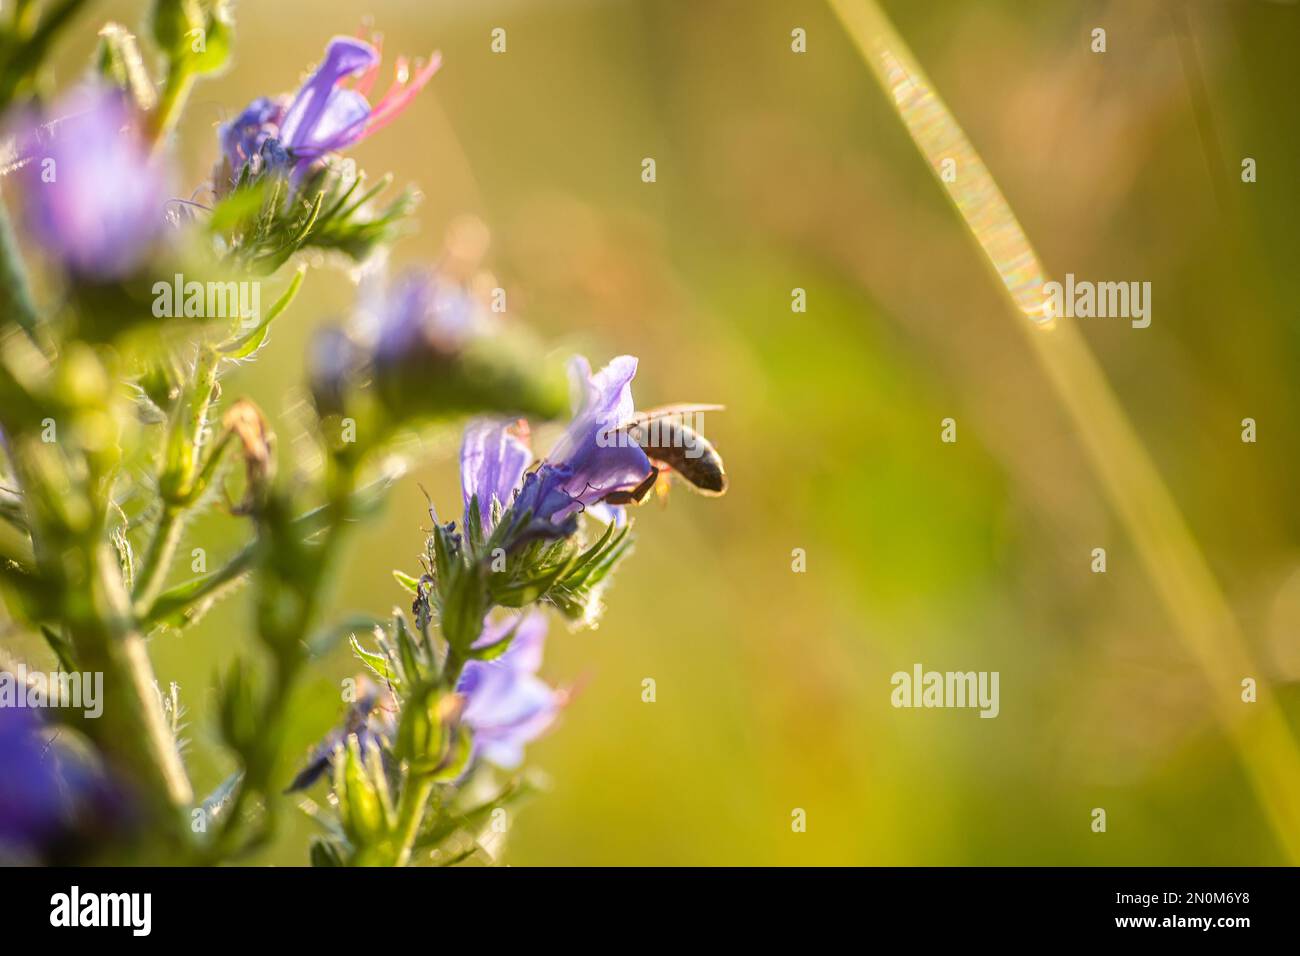 A bee collects nectar from Blue melliferous flowers of Echium vulgare viper's bugloss and blueweed blue weed flowers in the meadow in summer at sunset Stock Photo